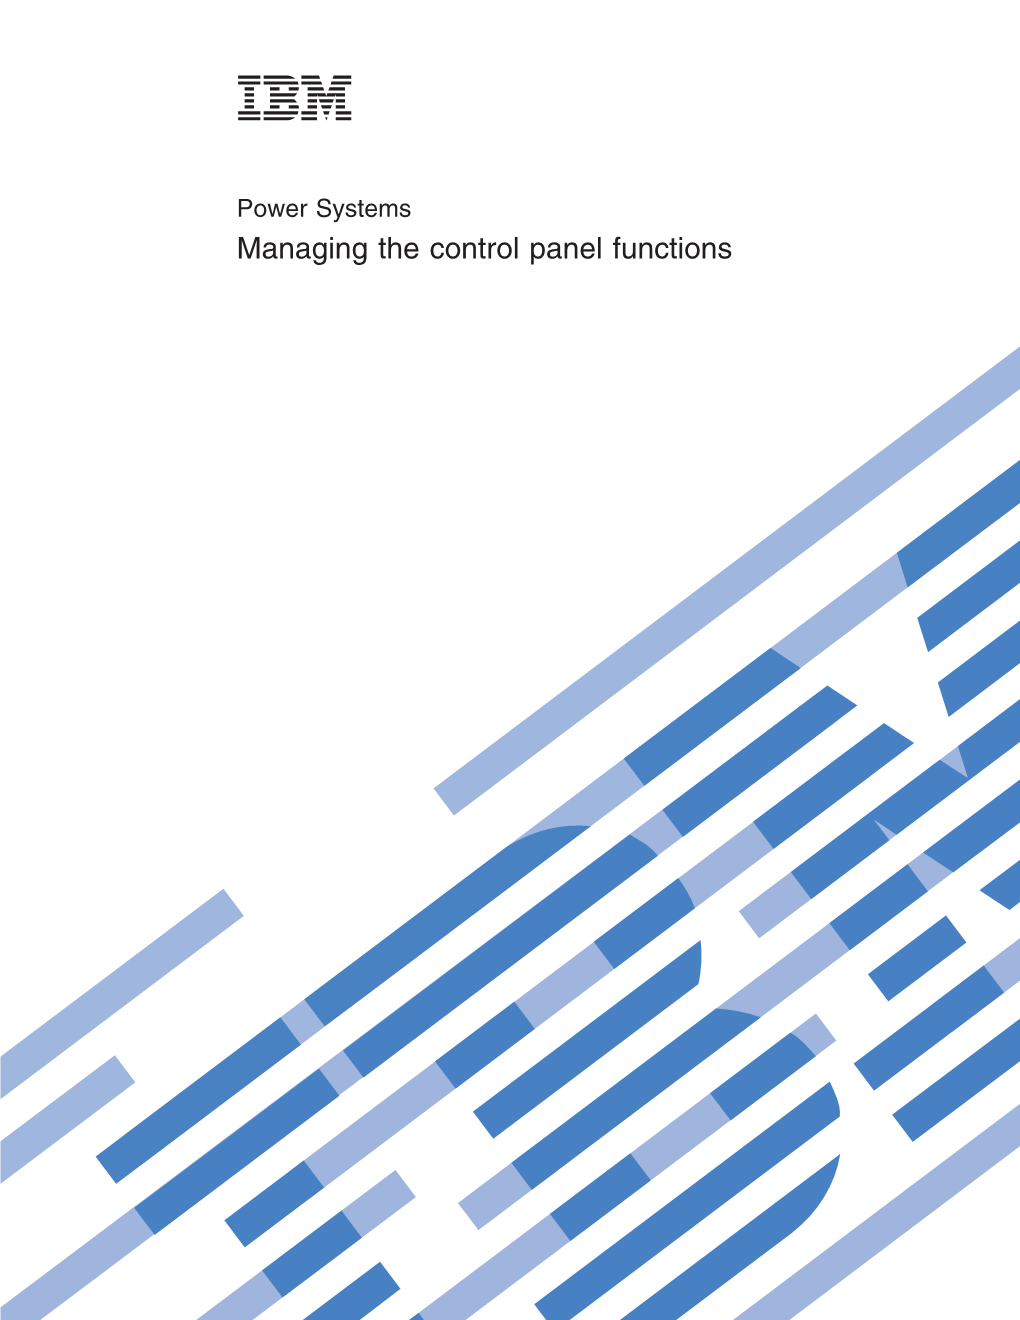 Power Systems Managing the Control Panel Functions